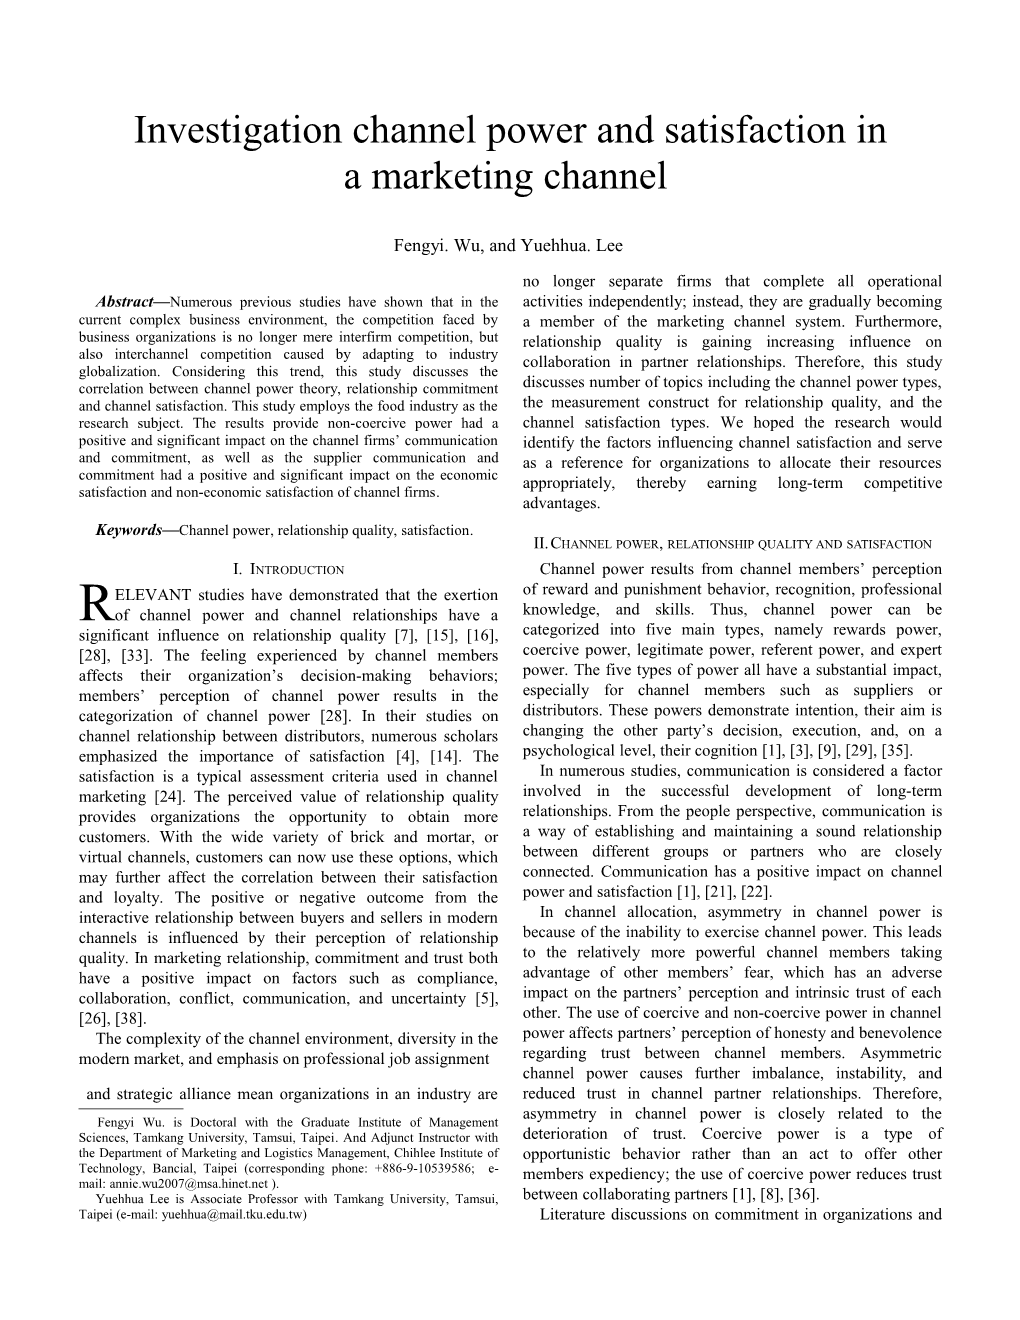 20120305 Investigation Channel Power and Satisfaction in a Marketing Channel